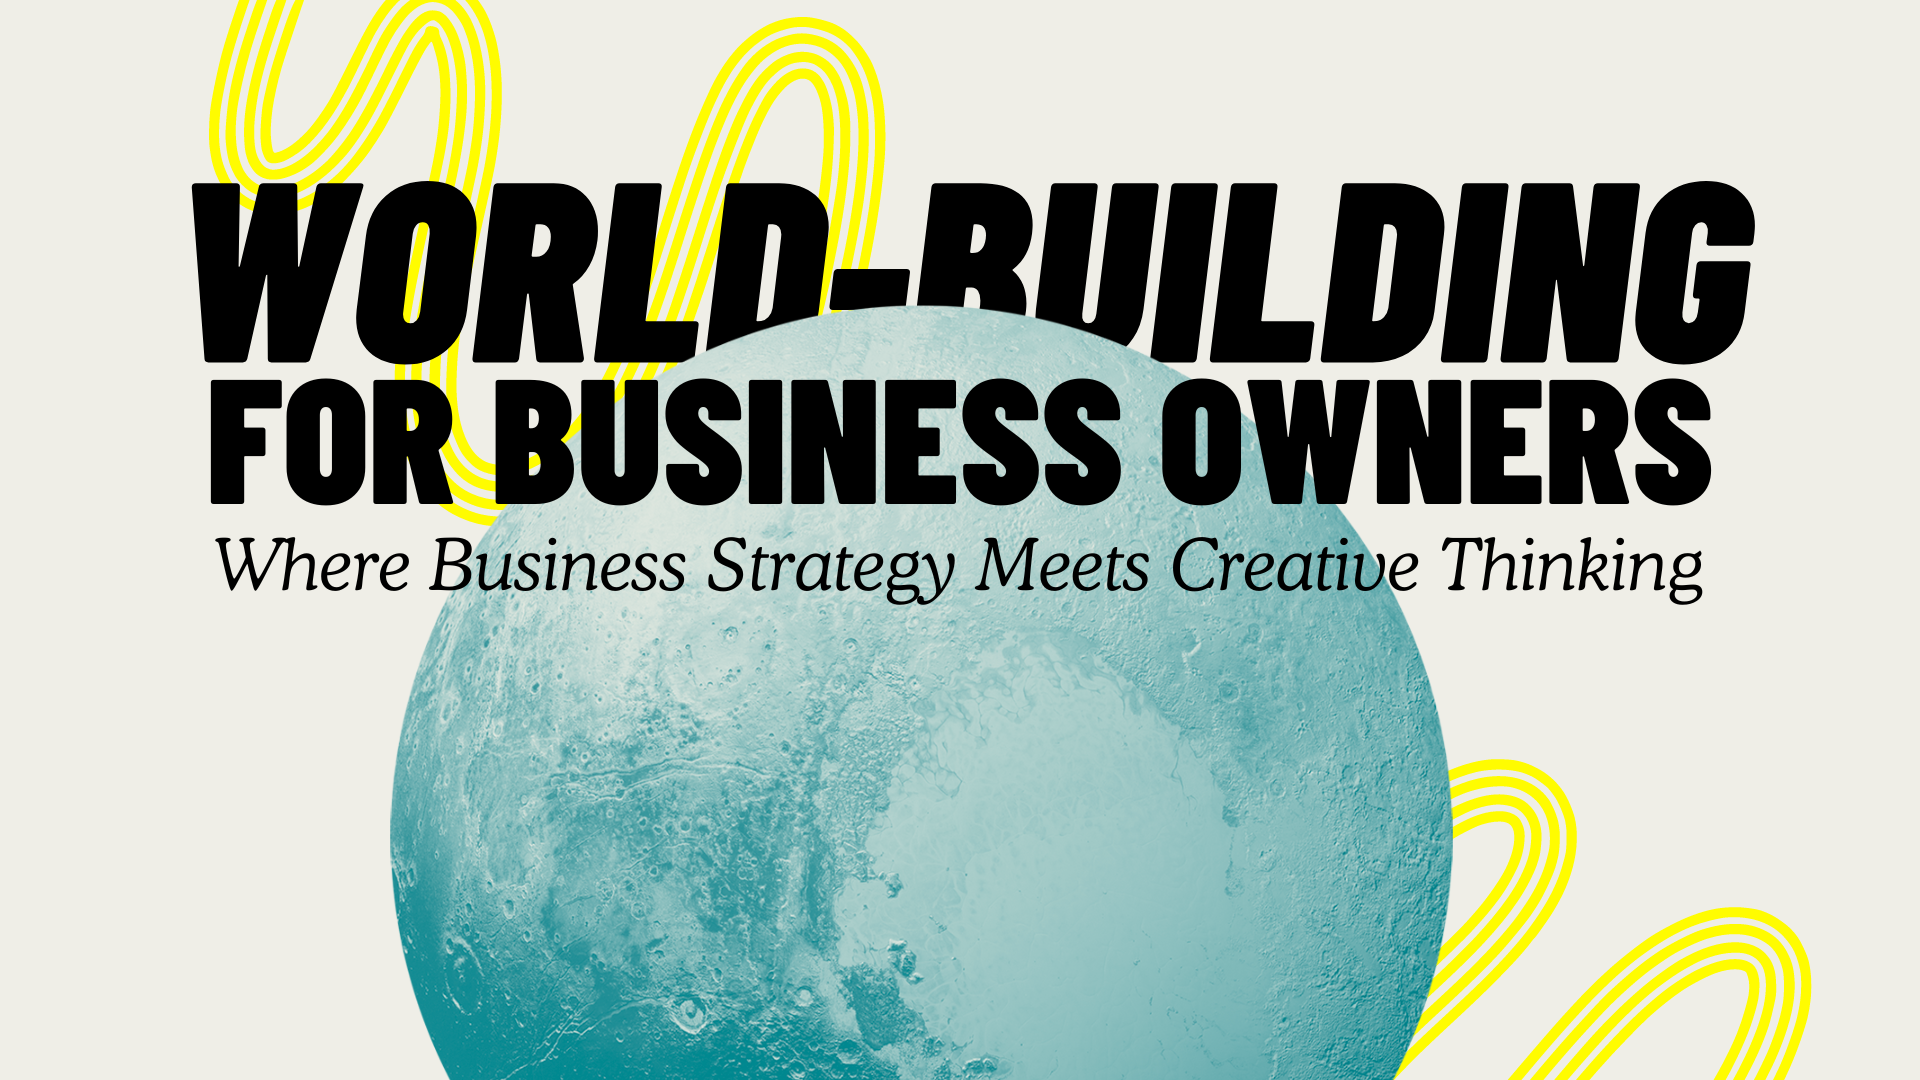 World-Building for Business Owners event cover photo